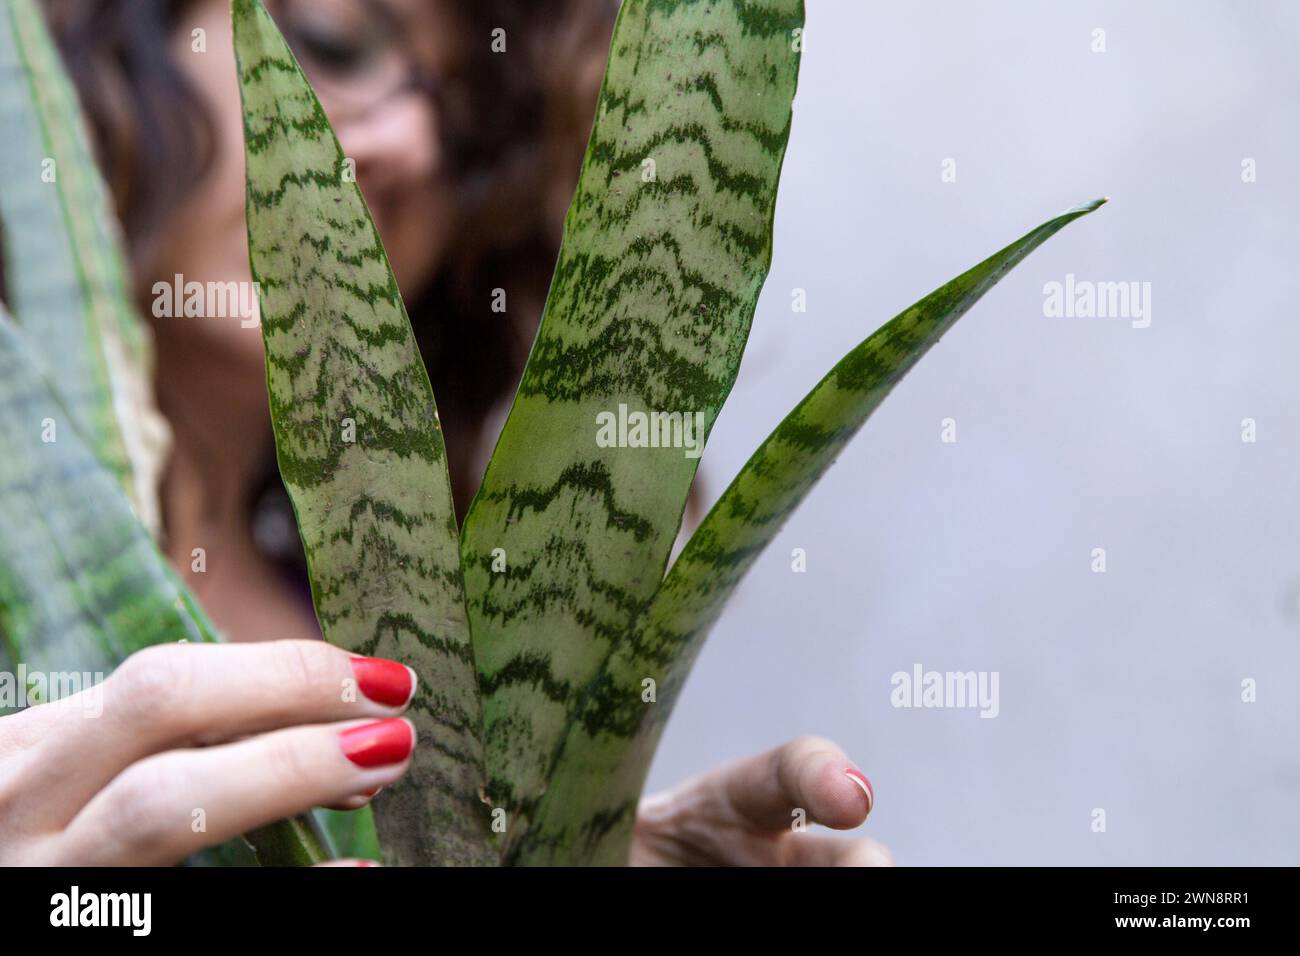 Adult female with glasses working on gardening at home. Stock Photo